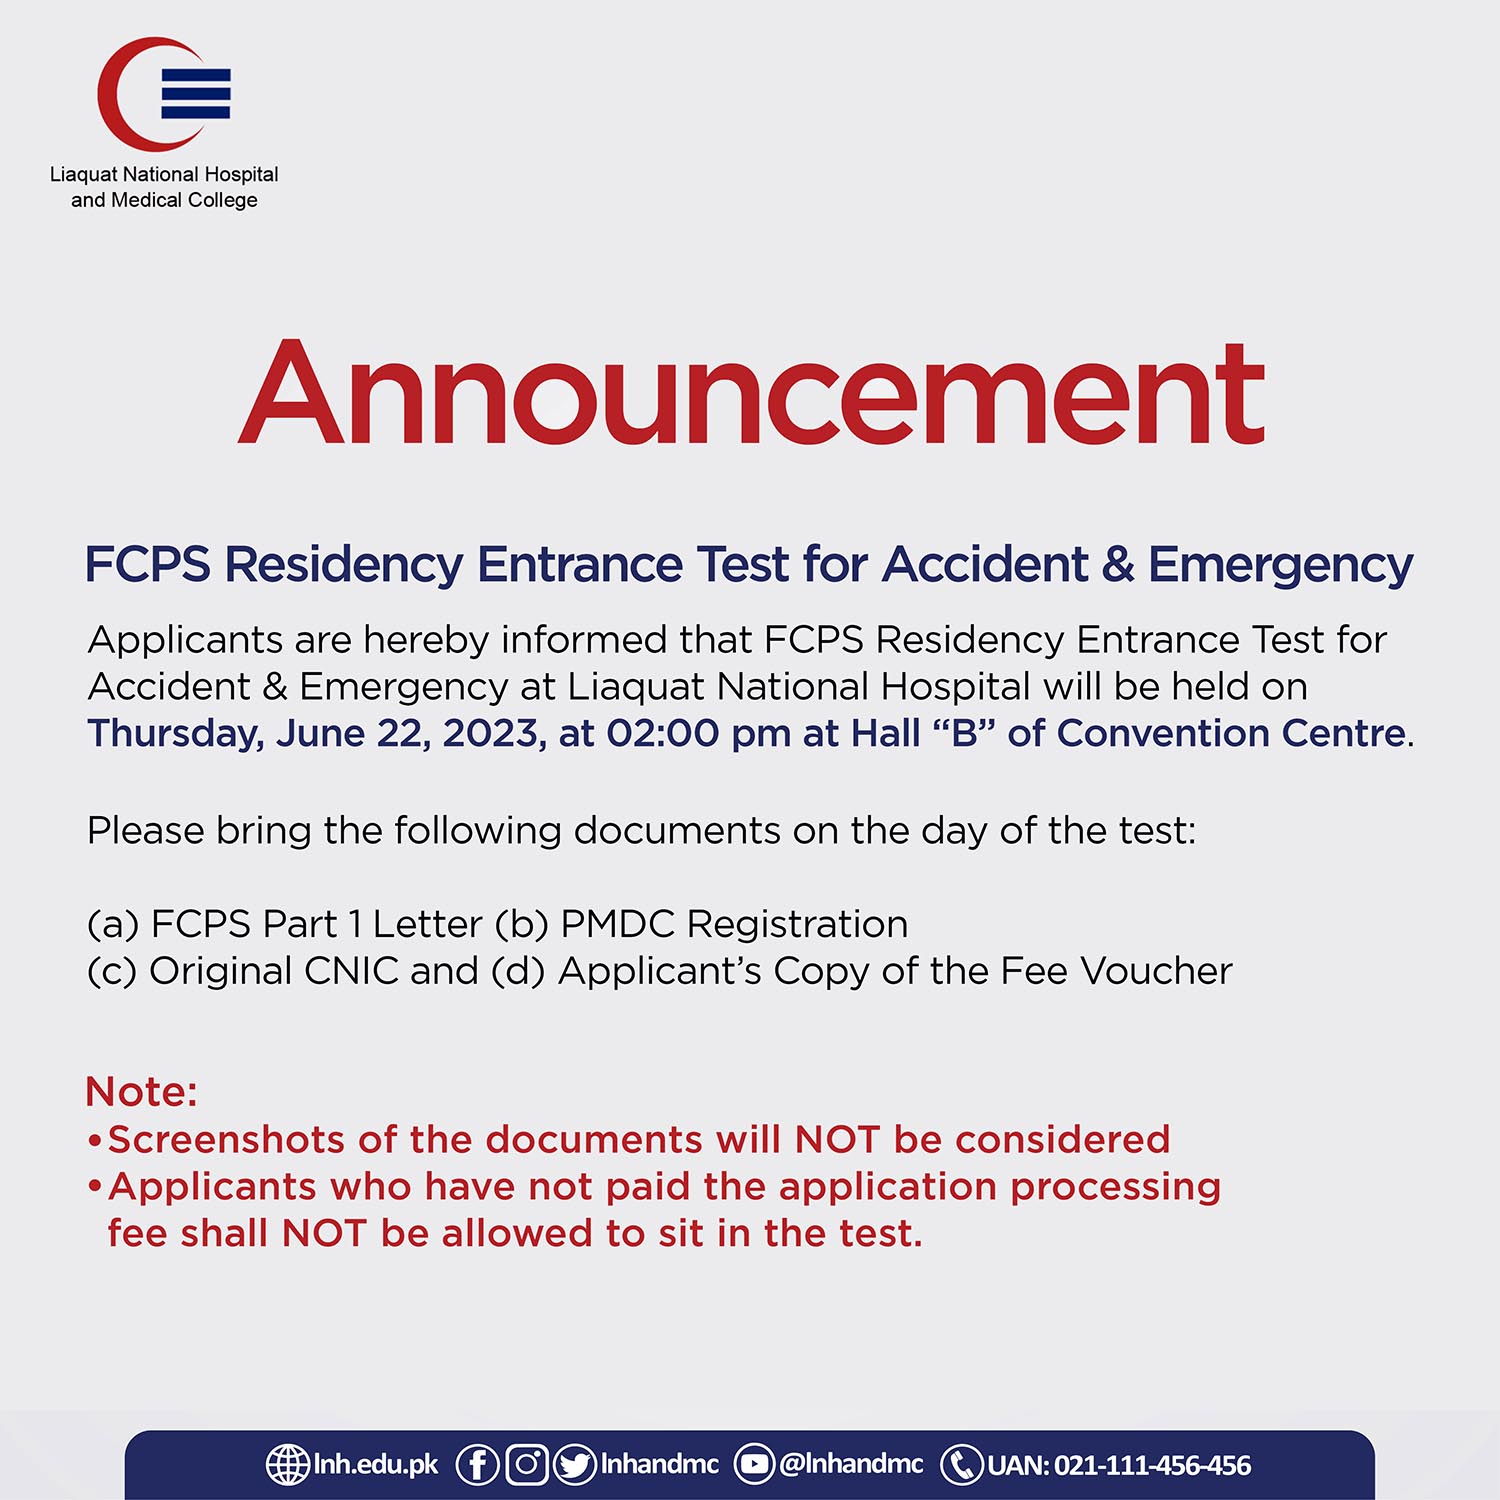 FCPS Residency Entrance Test for Accident & Emergency